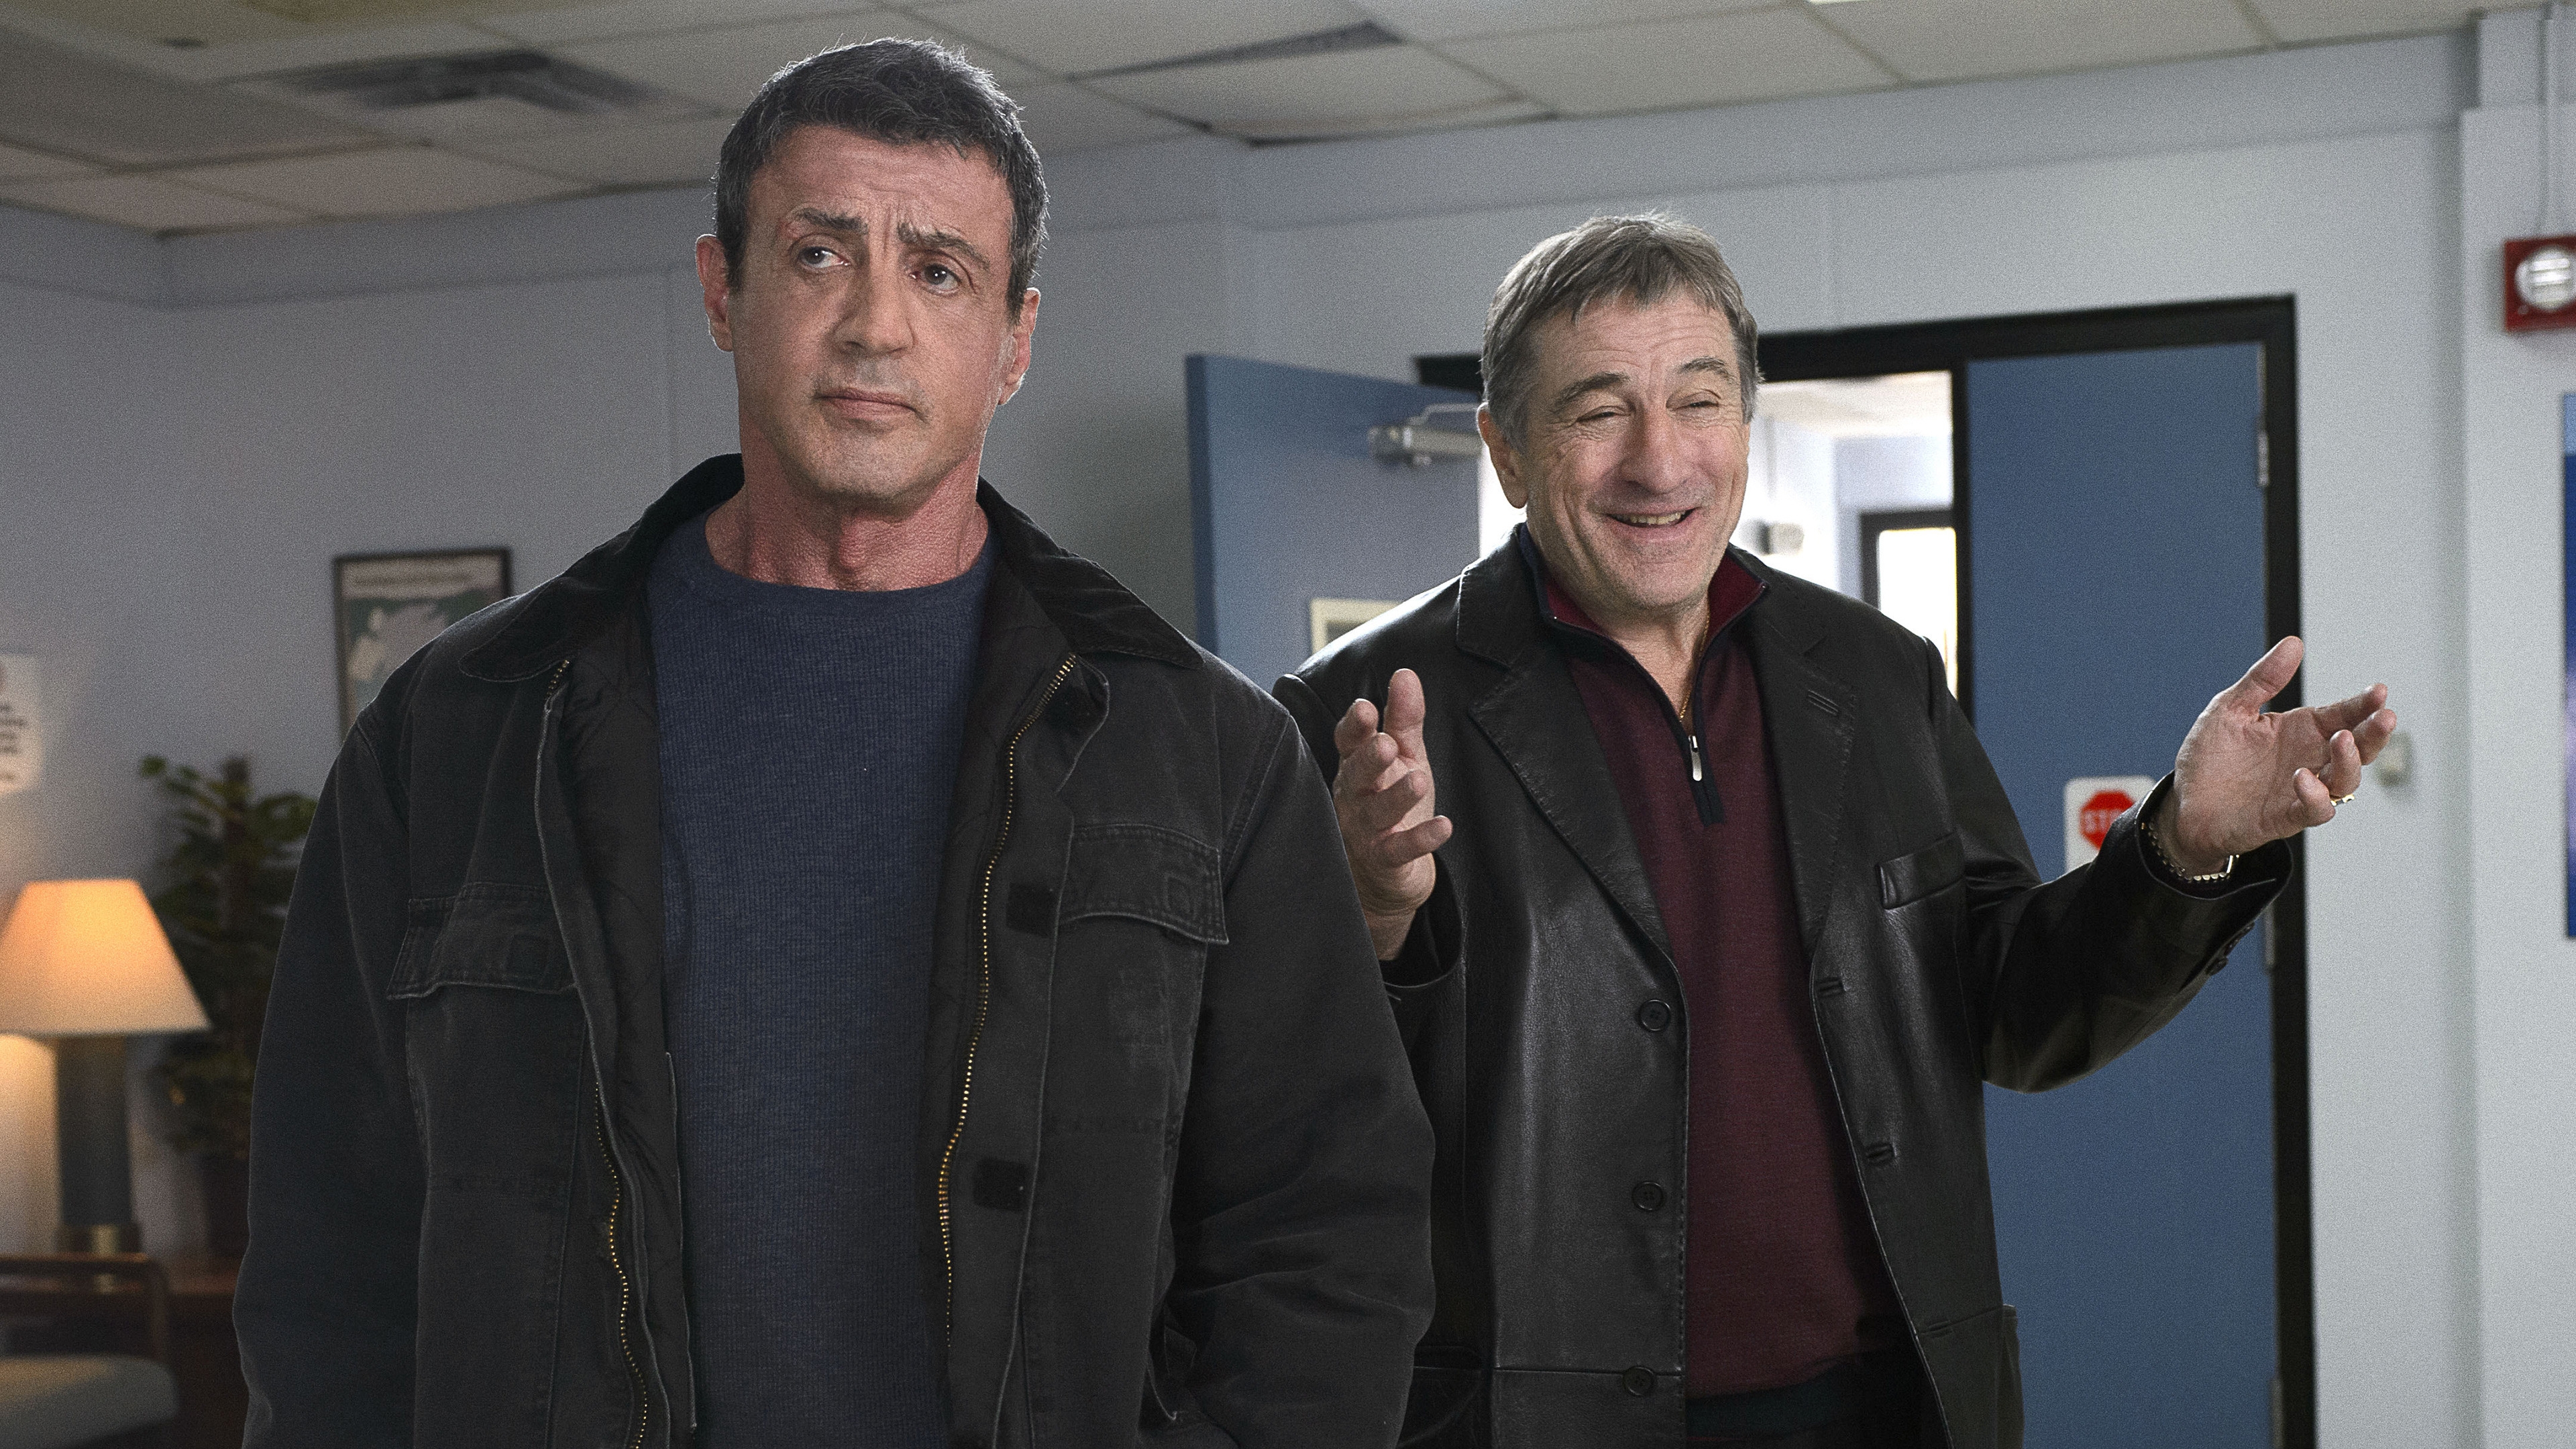 Stallone and Niro in Grudge Match for 3840 x 2160 Ultra HD resolution